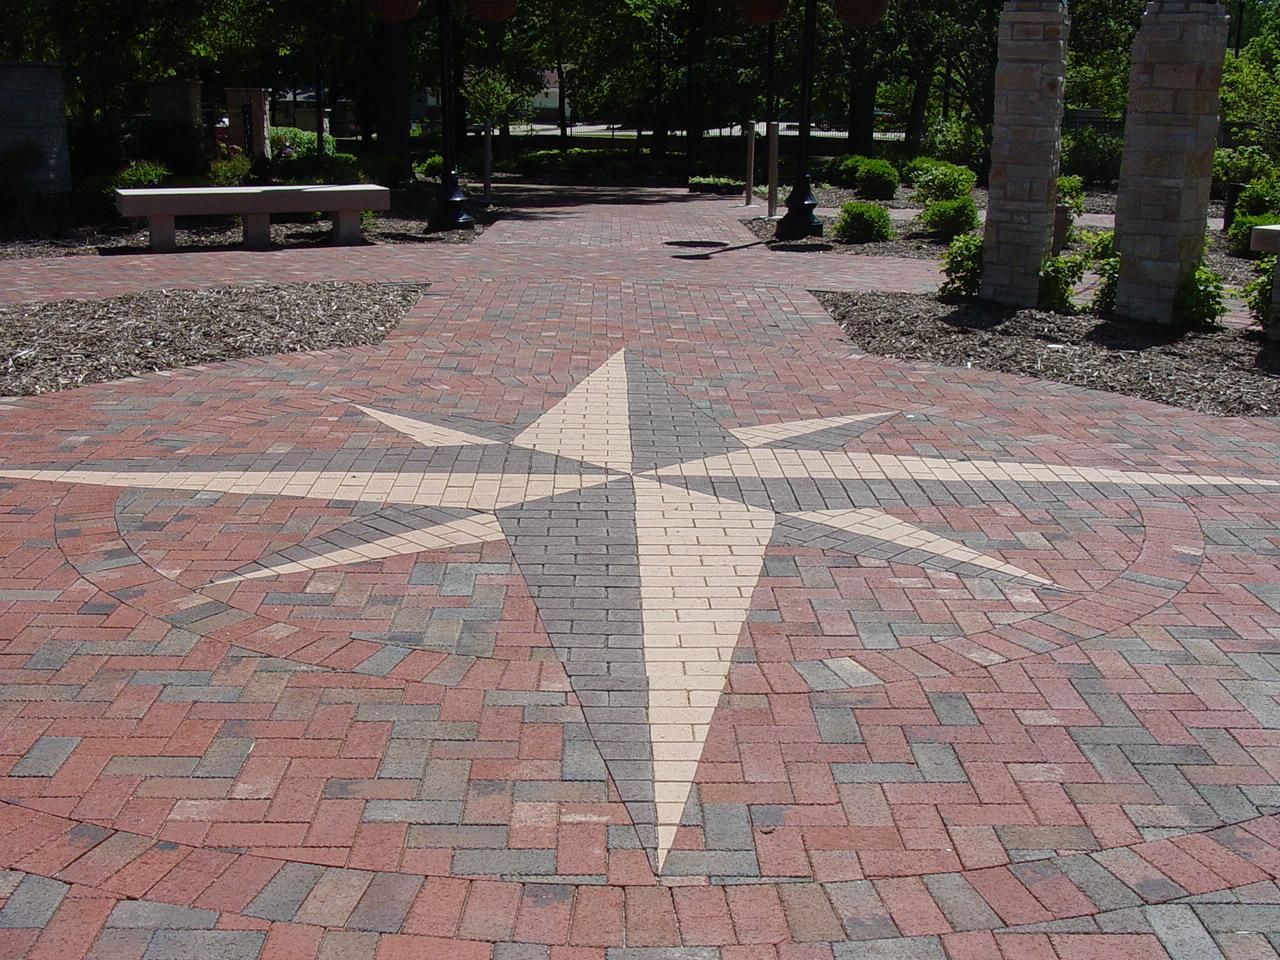 A brick paved walkway with a star design